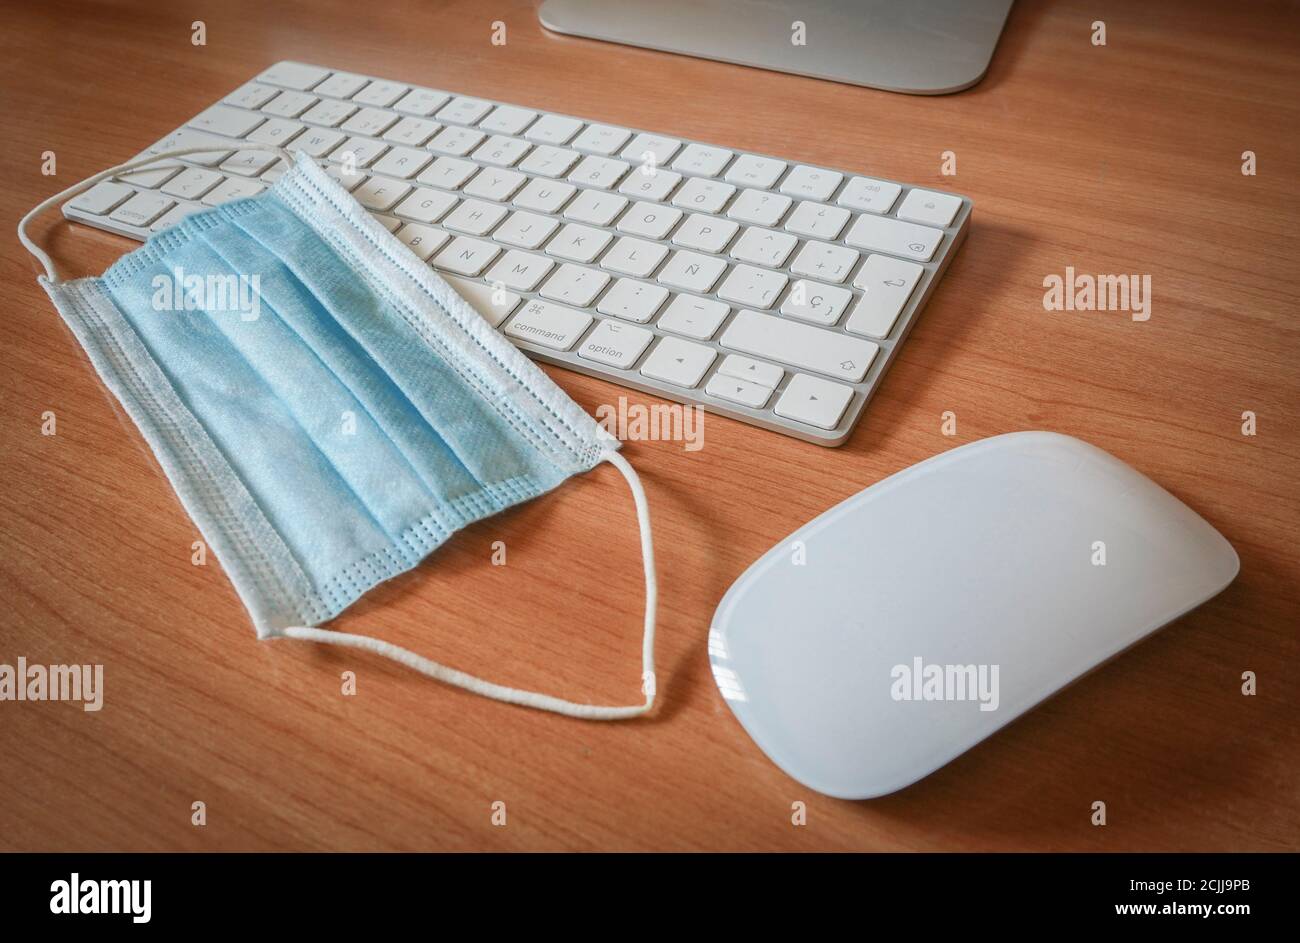 Surgical mask next to a keyboard and computer mouse. Concept of Covid pandemic and working. Stock Photo